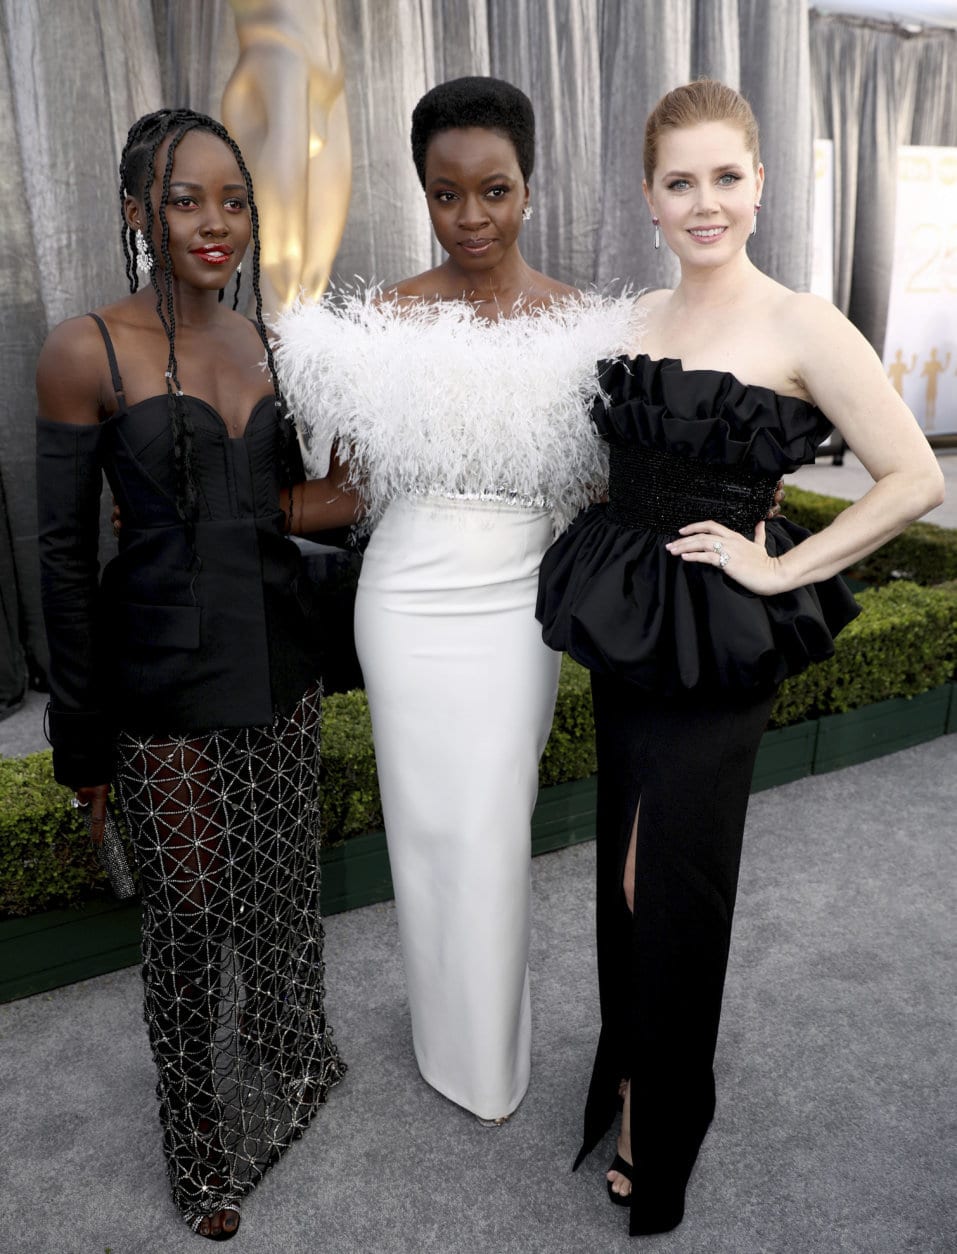 Lupita Nyong'o, from left, Danai Gurira, and Amy Adams arrive at the 25th annual Screen Actors Guild Awards at the Shrine Auditorium &amp; Expo Hall on Sunday, Jan. 27, 2019, in Los Angeles. (Photo by Matt Sayles/Invision/AP)